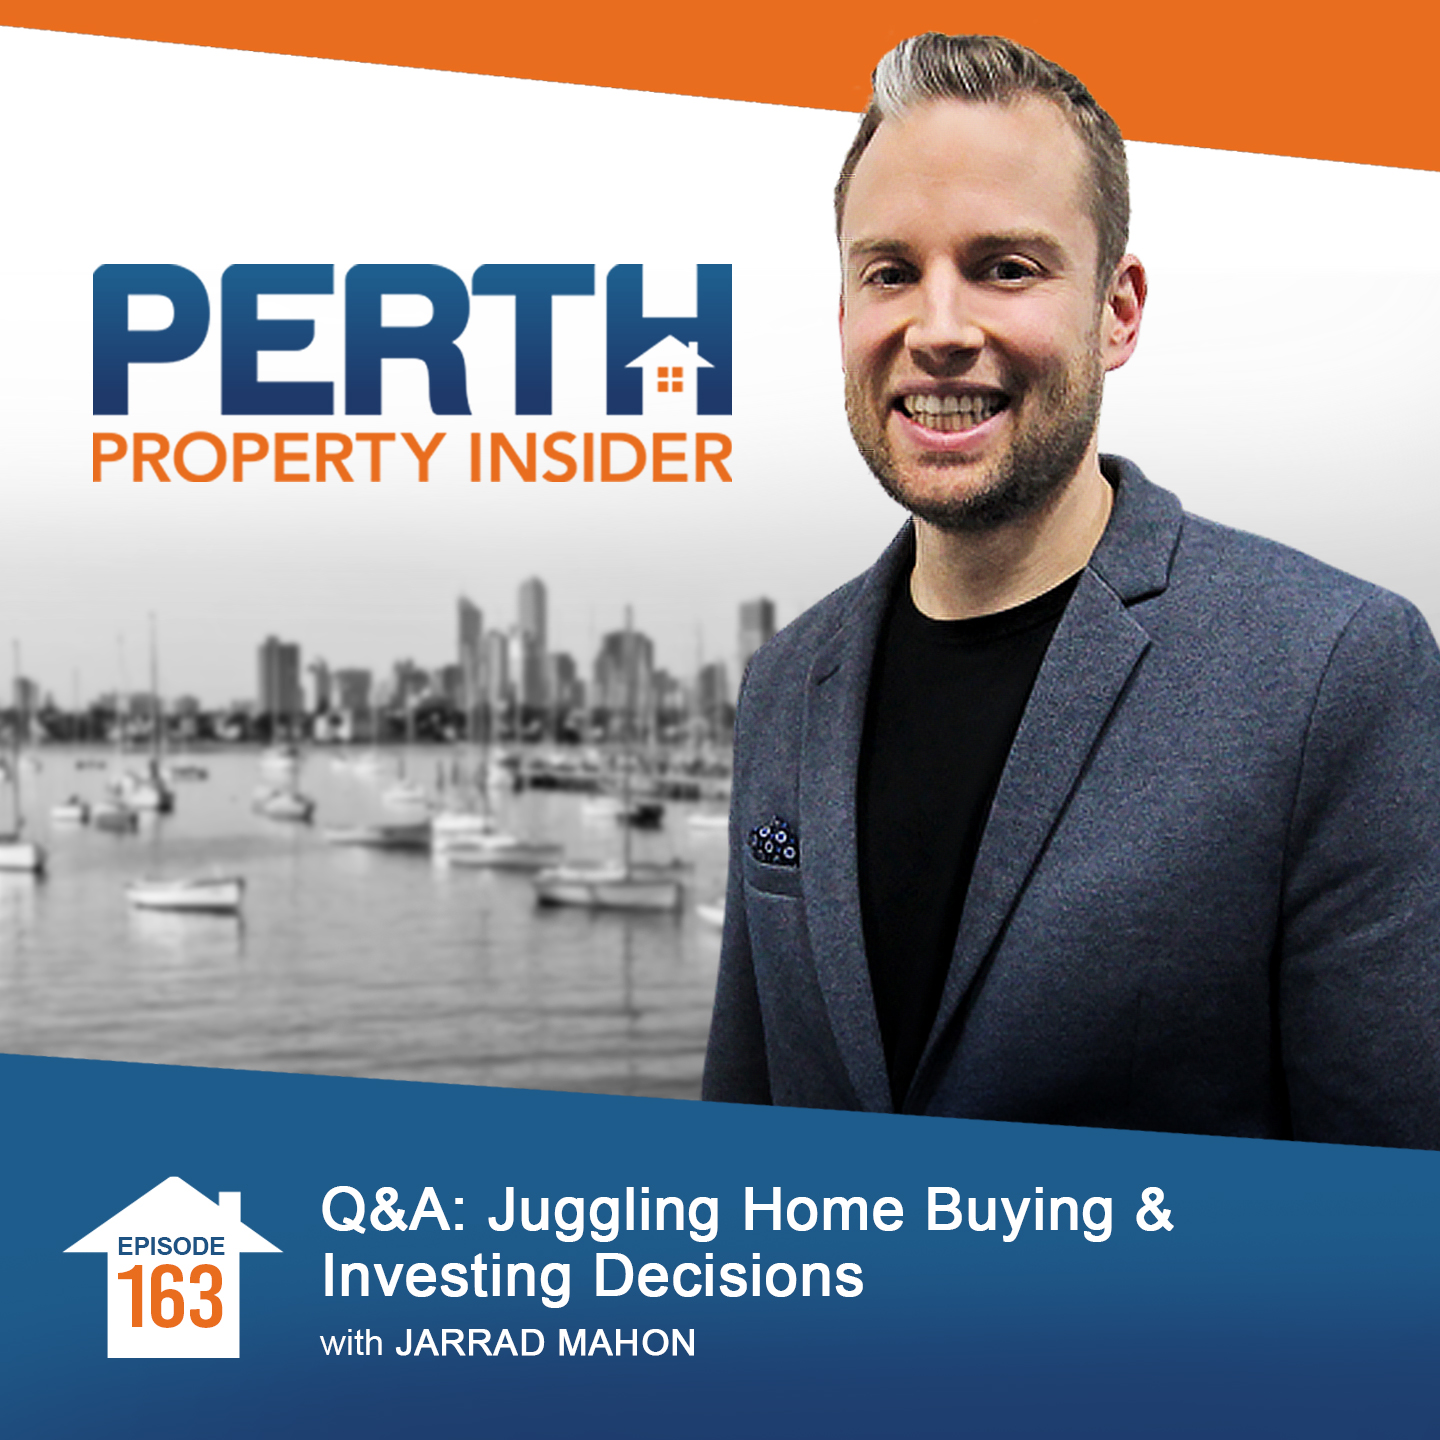 Q&A: Juggling Home Buying & Investing Decisions